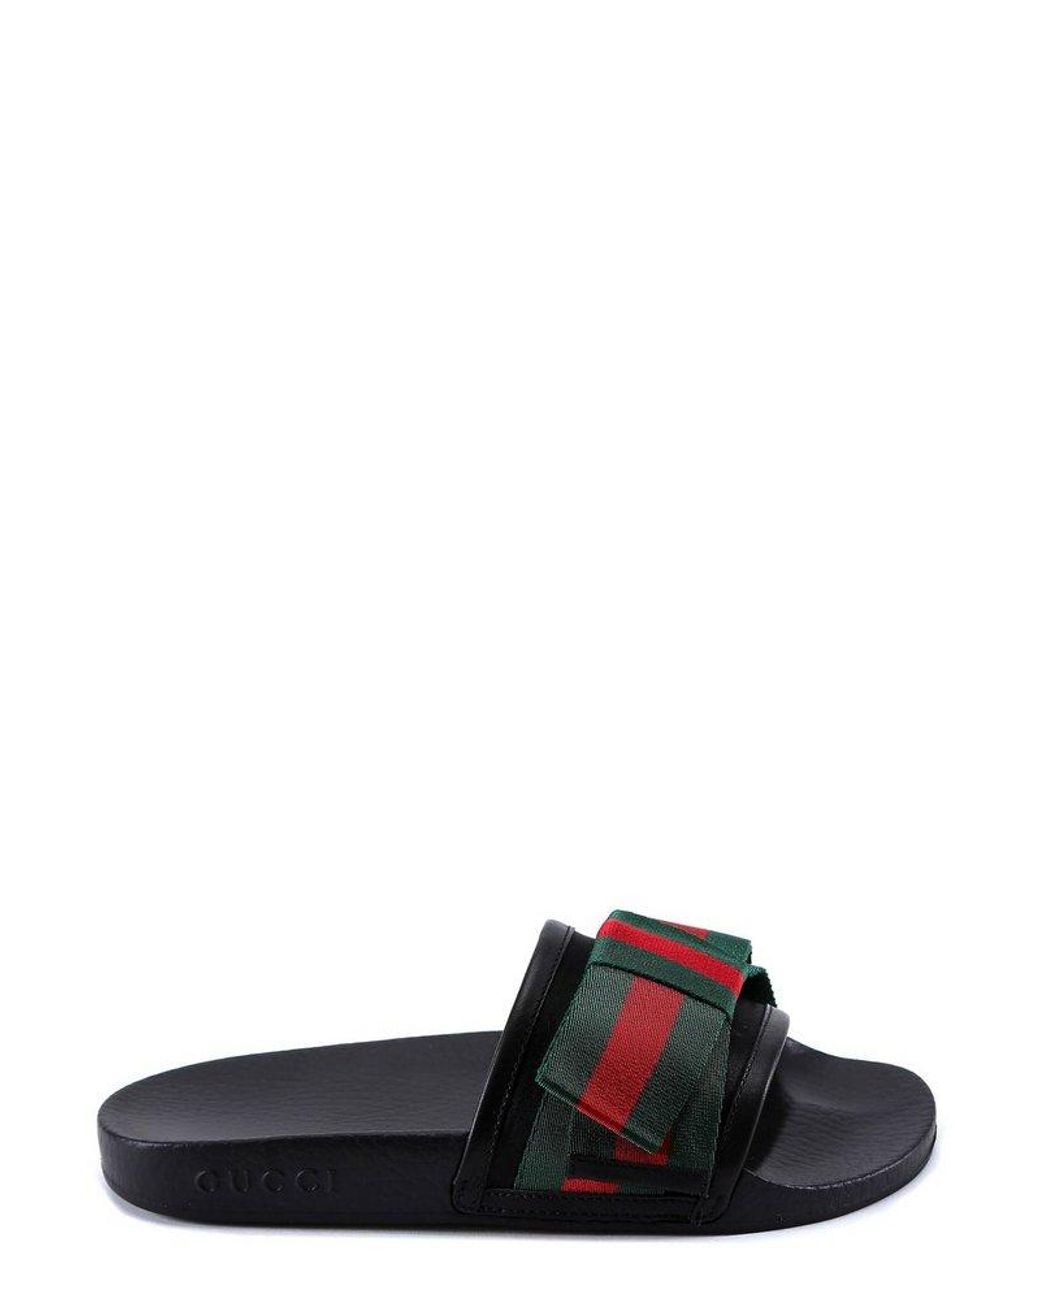 Gucci Striped Bow Slides in Black | Lyst